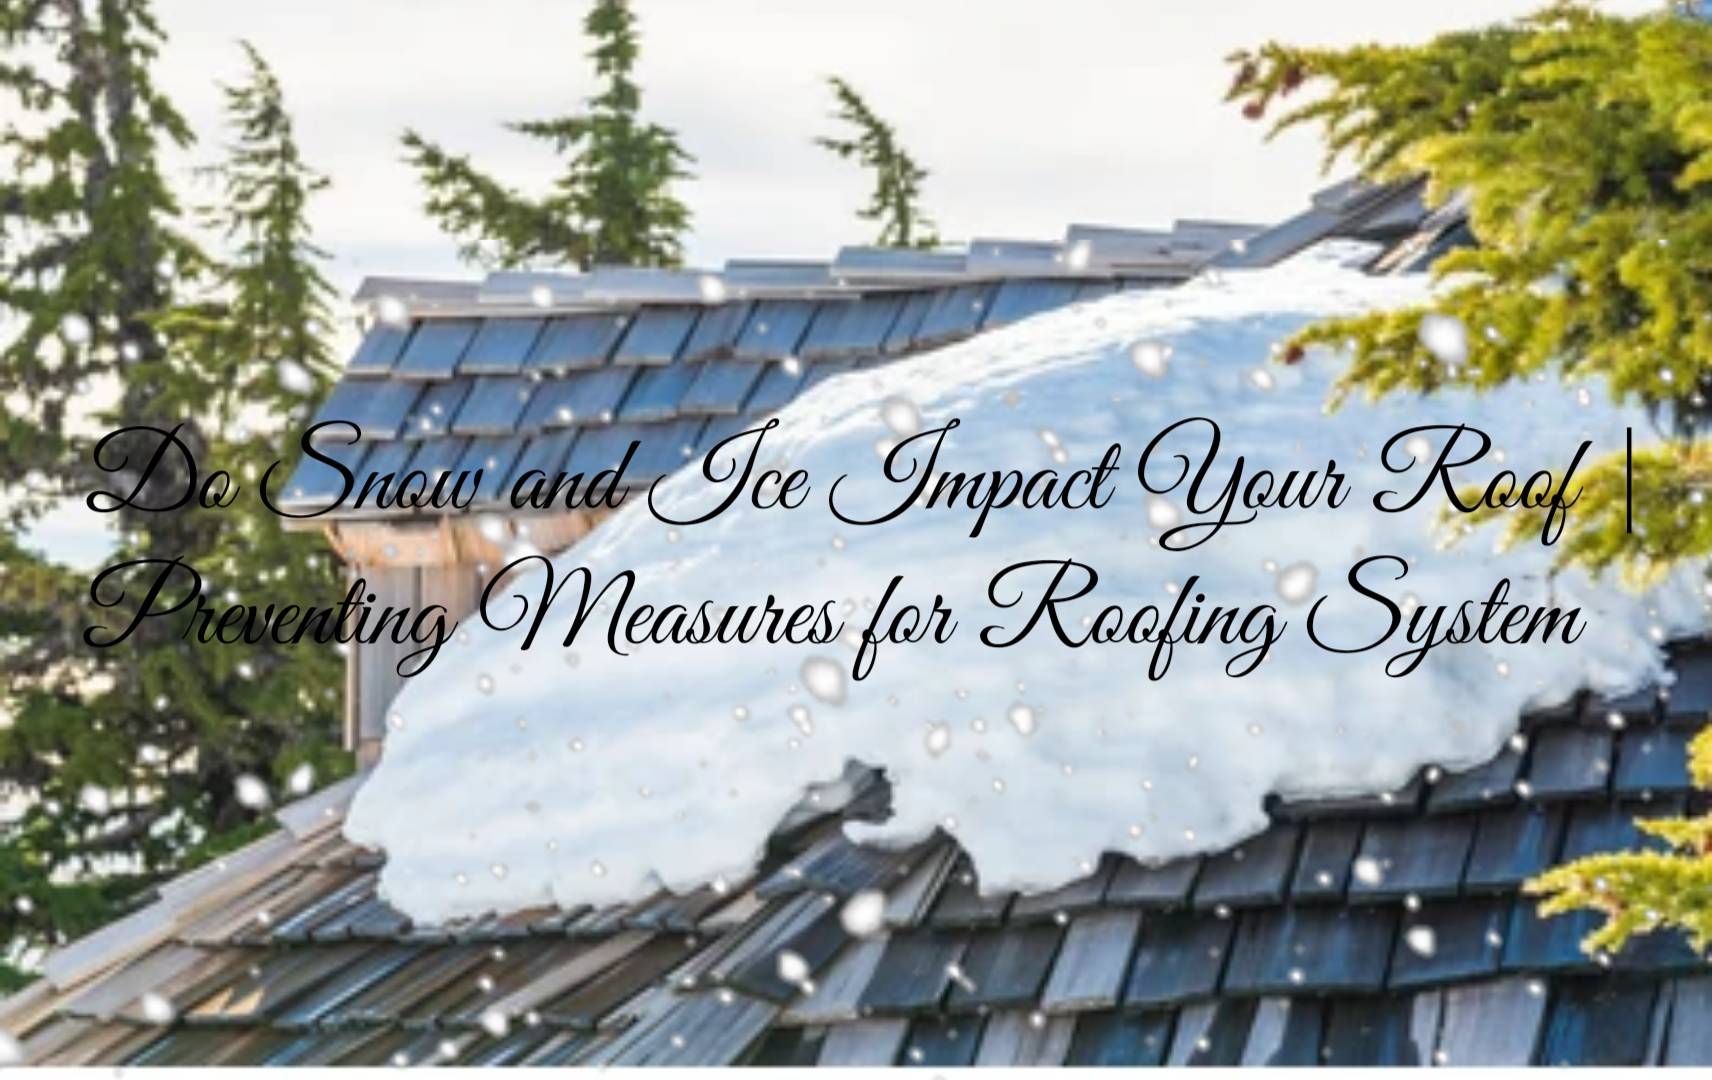 Do Snow and Ice Impact Your Roof | Preventing Measures for Roofing System